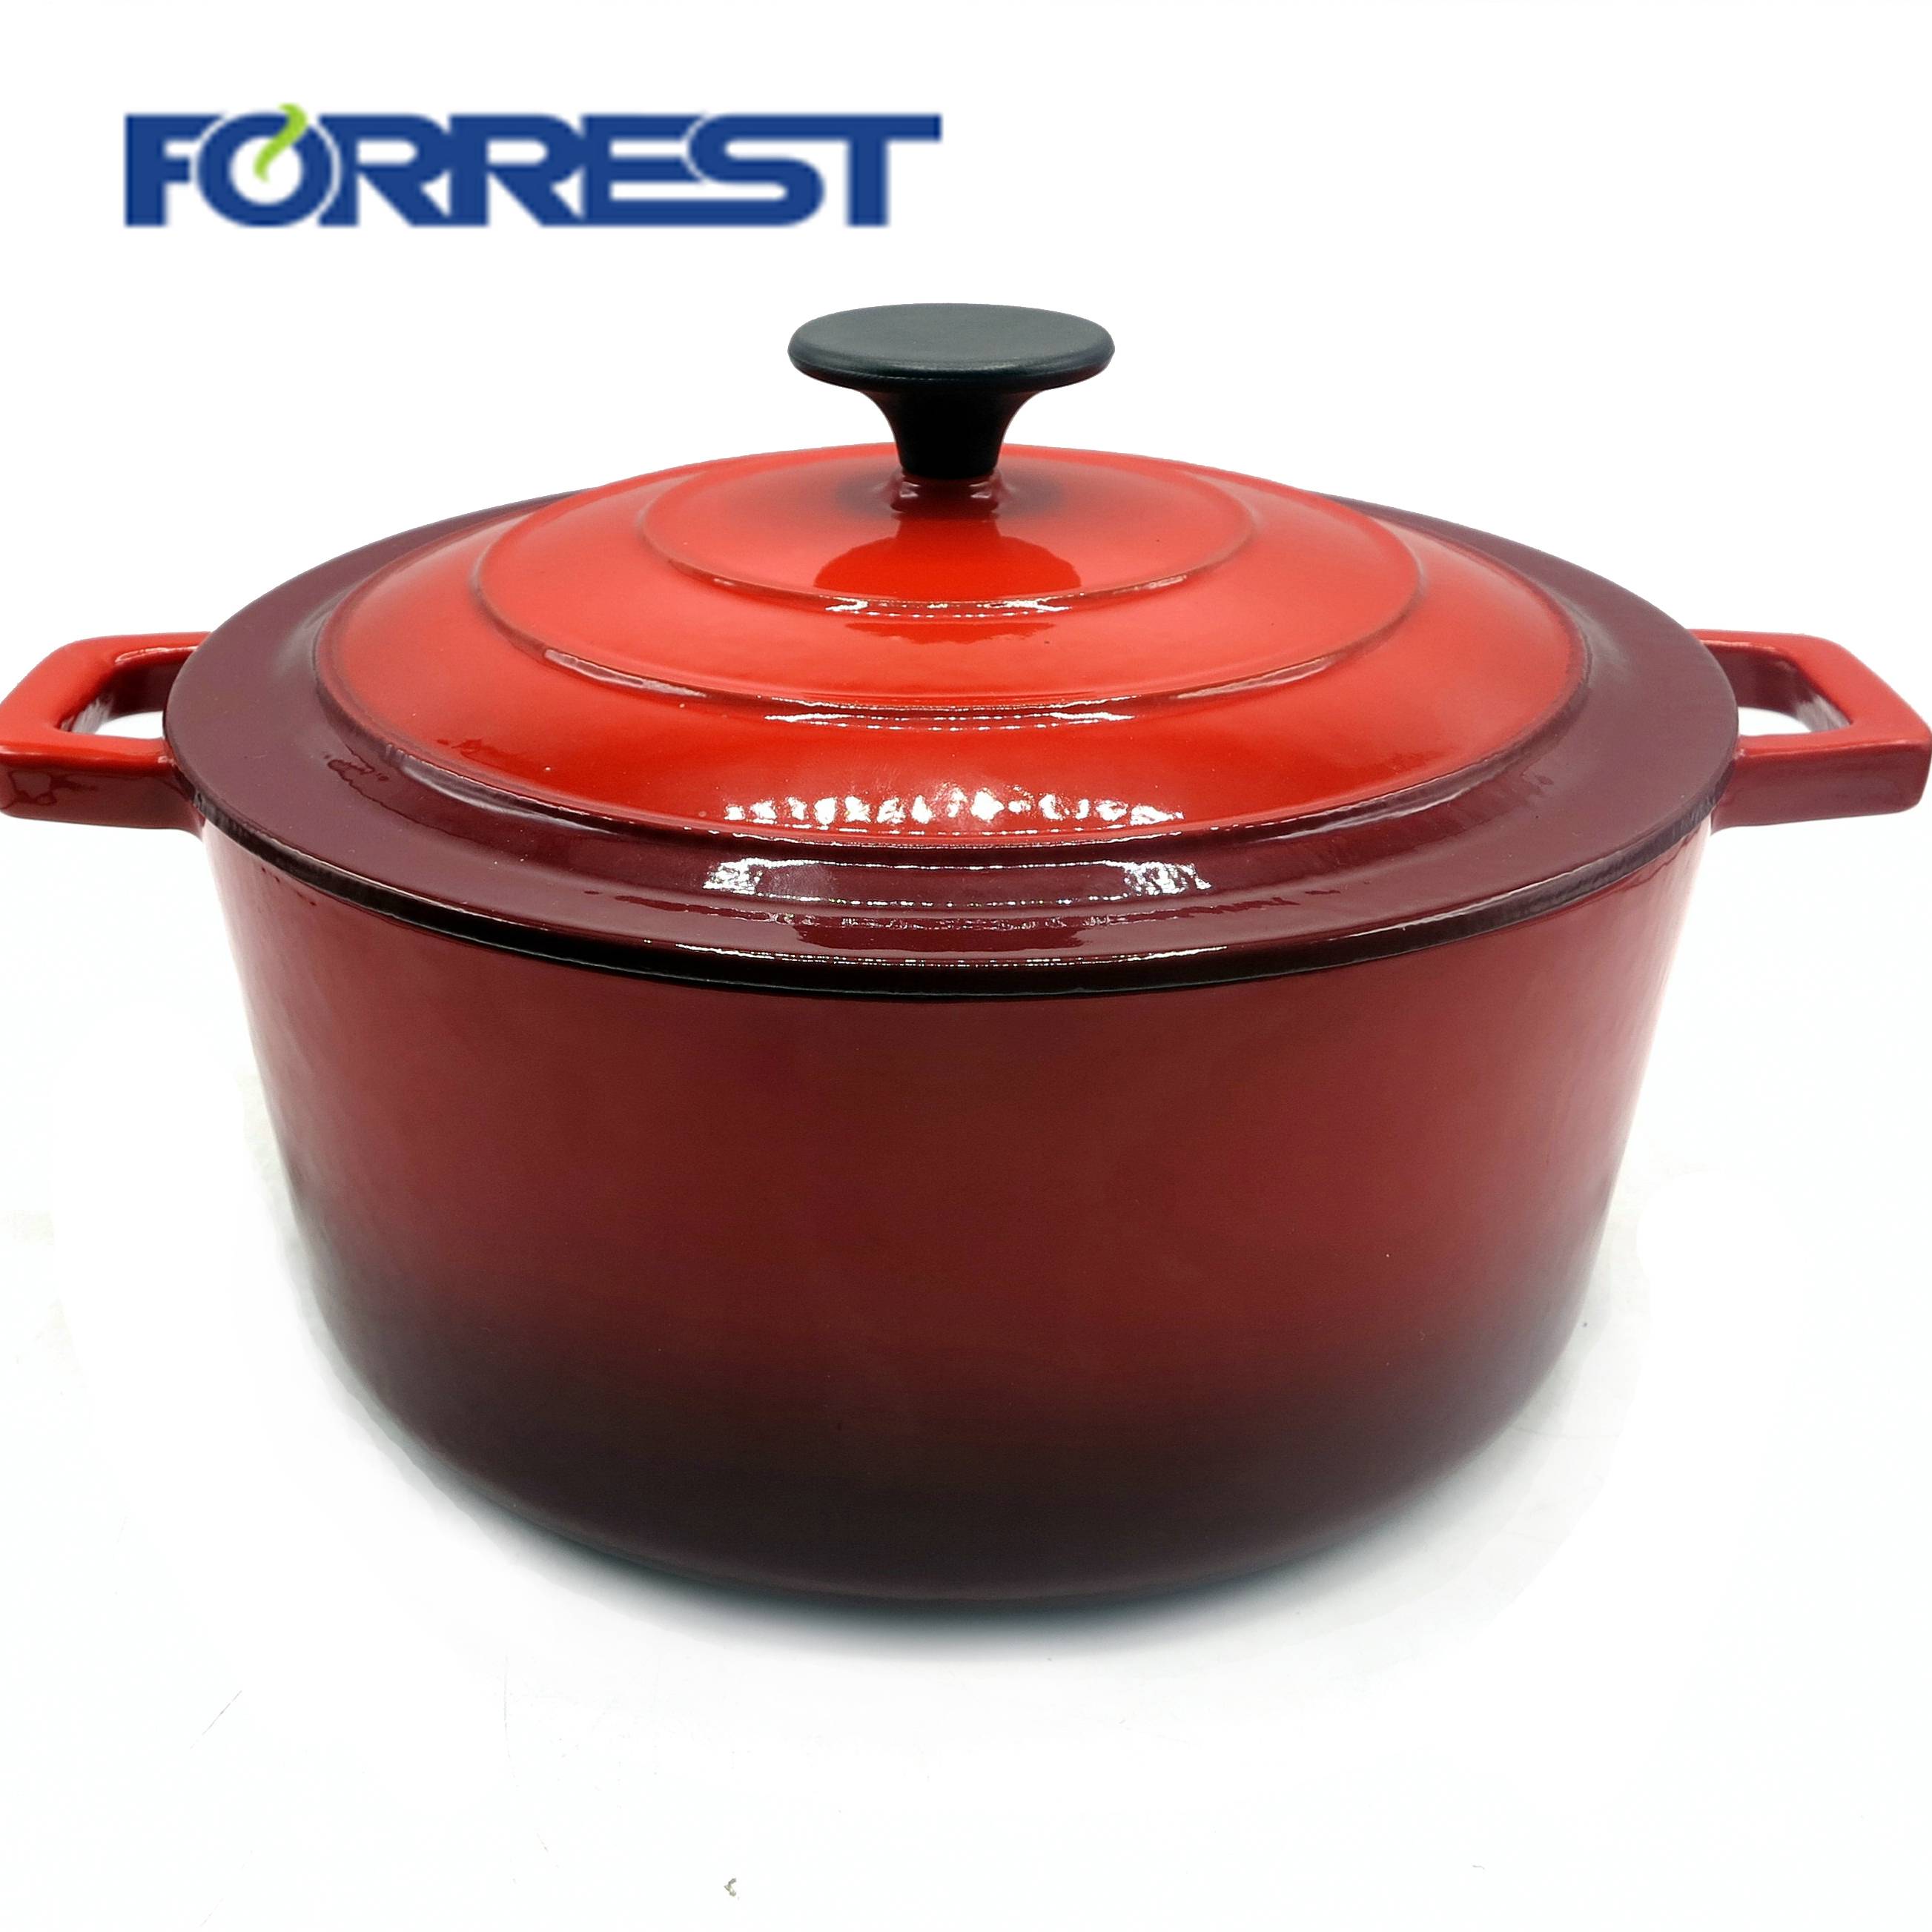 100% Original Factory Cast Iron Pans - Amazon Hot sale  enamel cookware set insulated food warmer cast iron casserole for kitchen cooking delicious food dia 25.5CM – Forrest